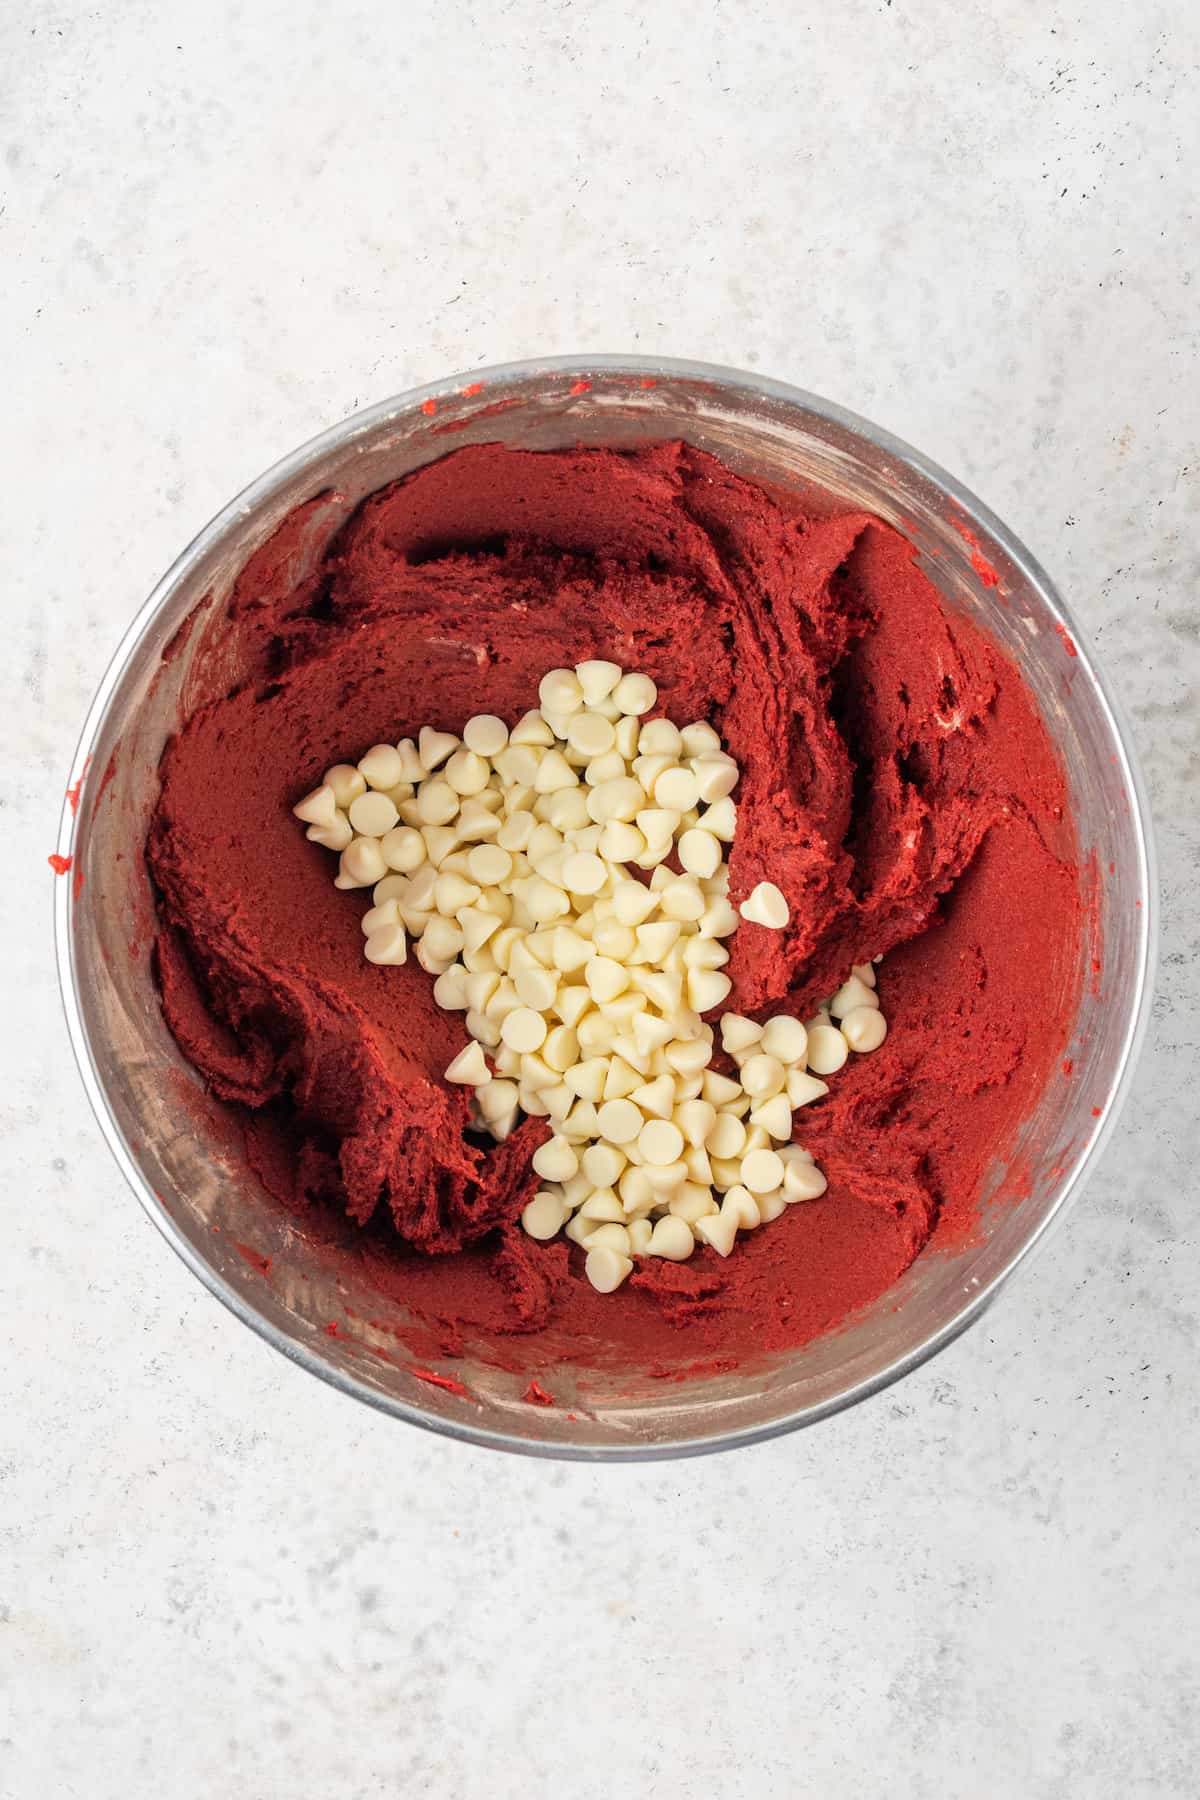 White chocolate chips are added to a bowl of gluten free red velvet cookie dough.